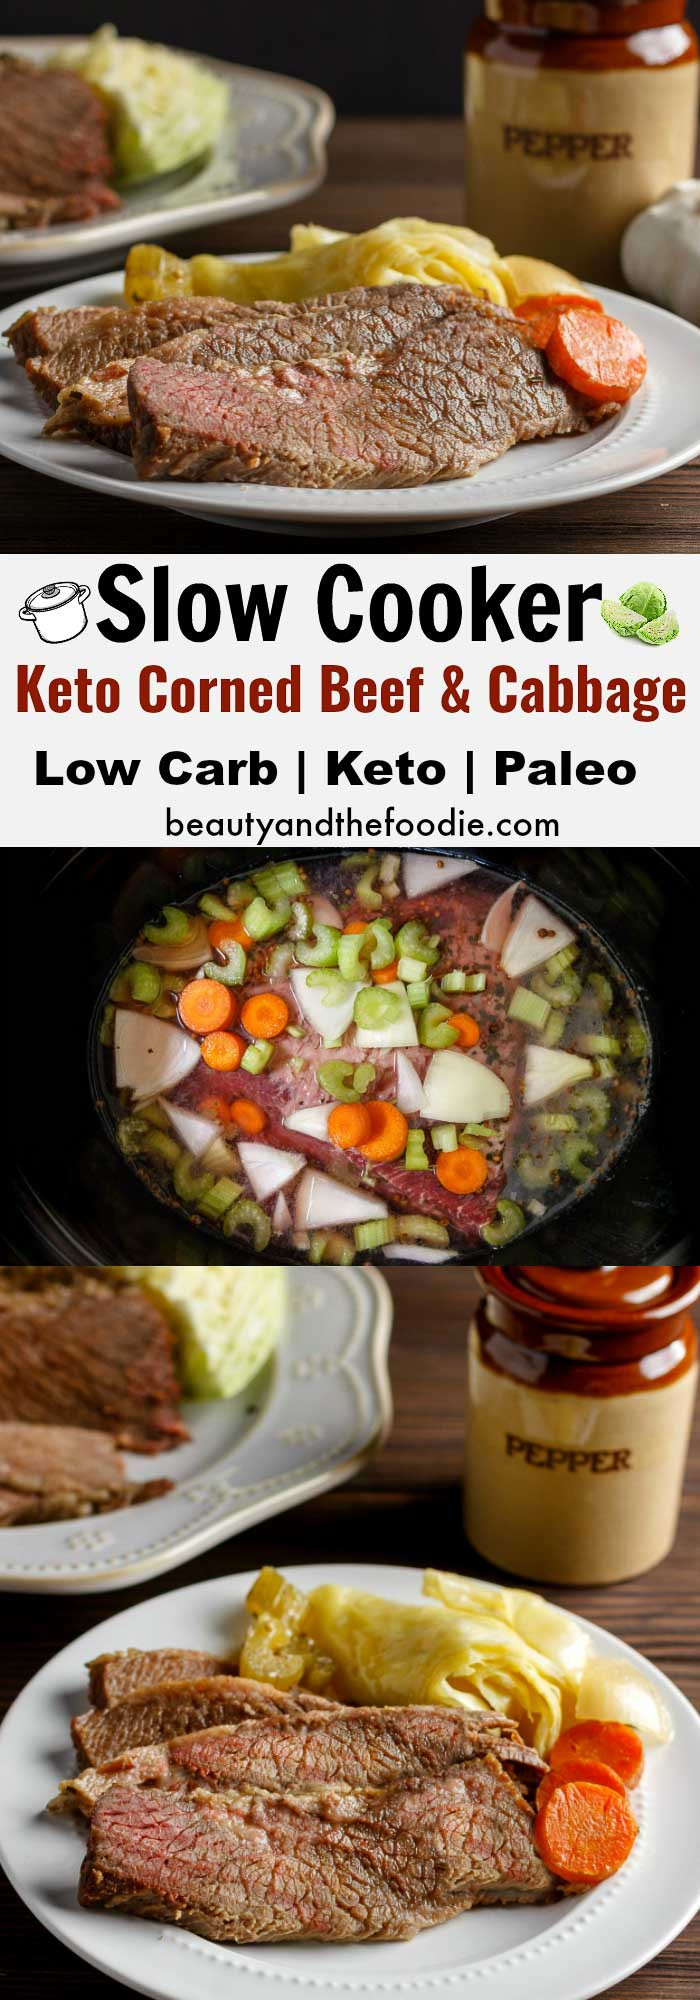 Corned Beef And Cabbage Calories
 Slow Cooker Keto Corned Beef Cabbage